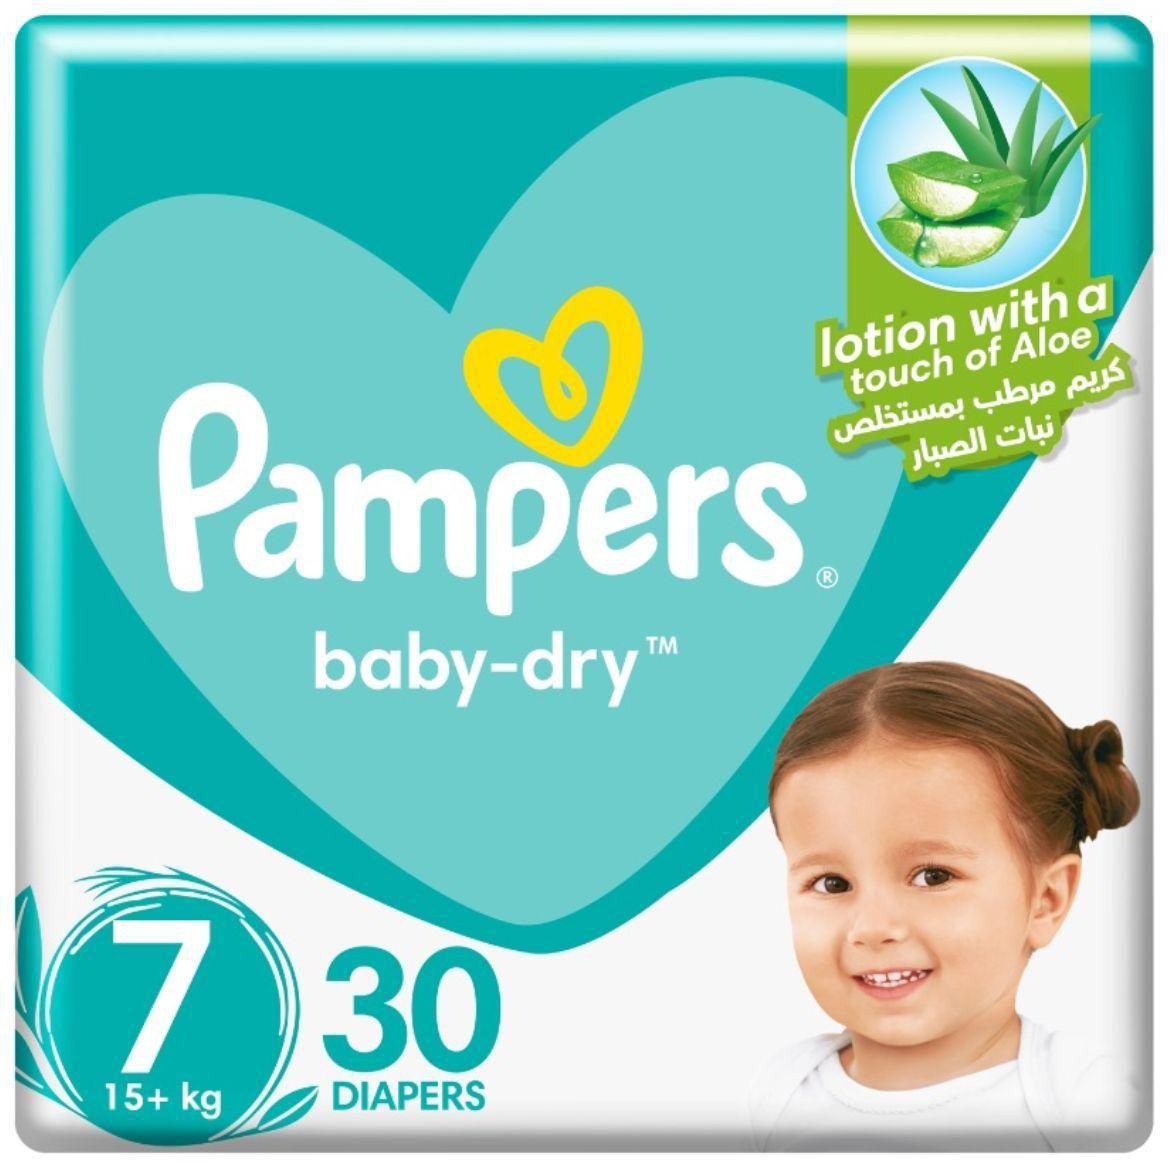 Pampers, Taped Diapers, With Aloe Vera Extract, Size 7, 15+ Kg - 30 Pcs